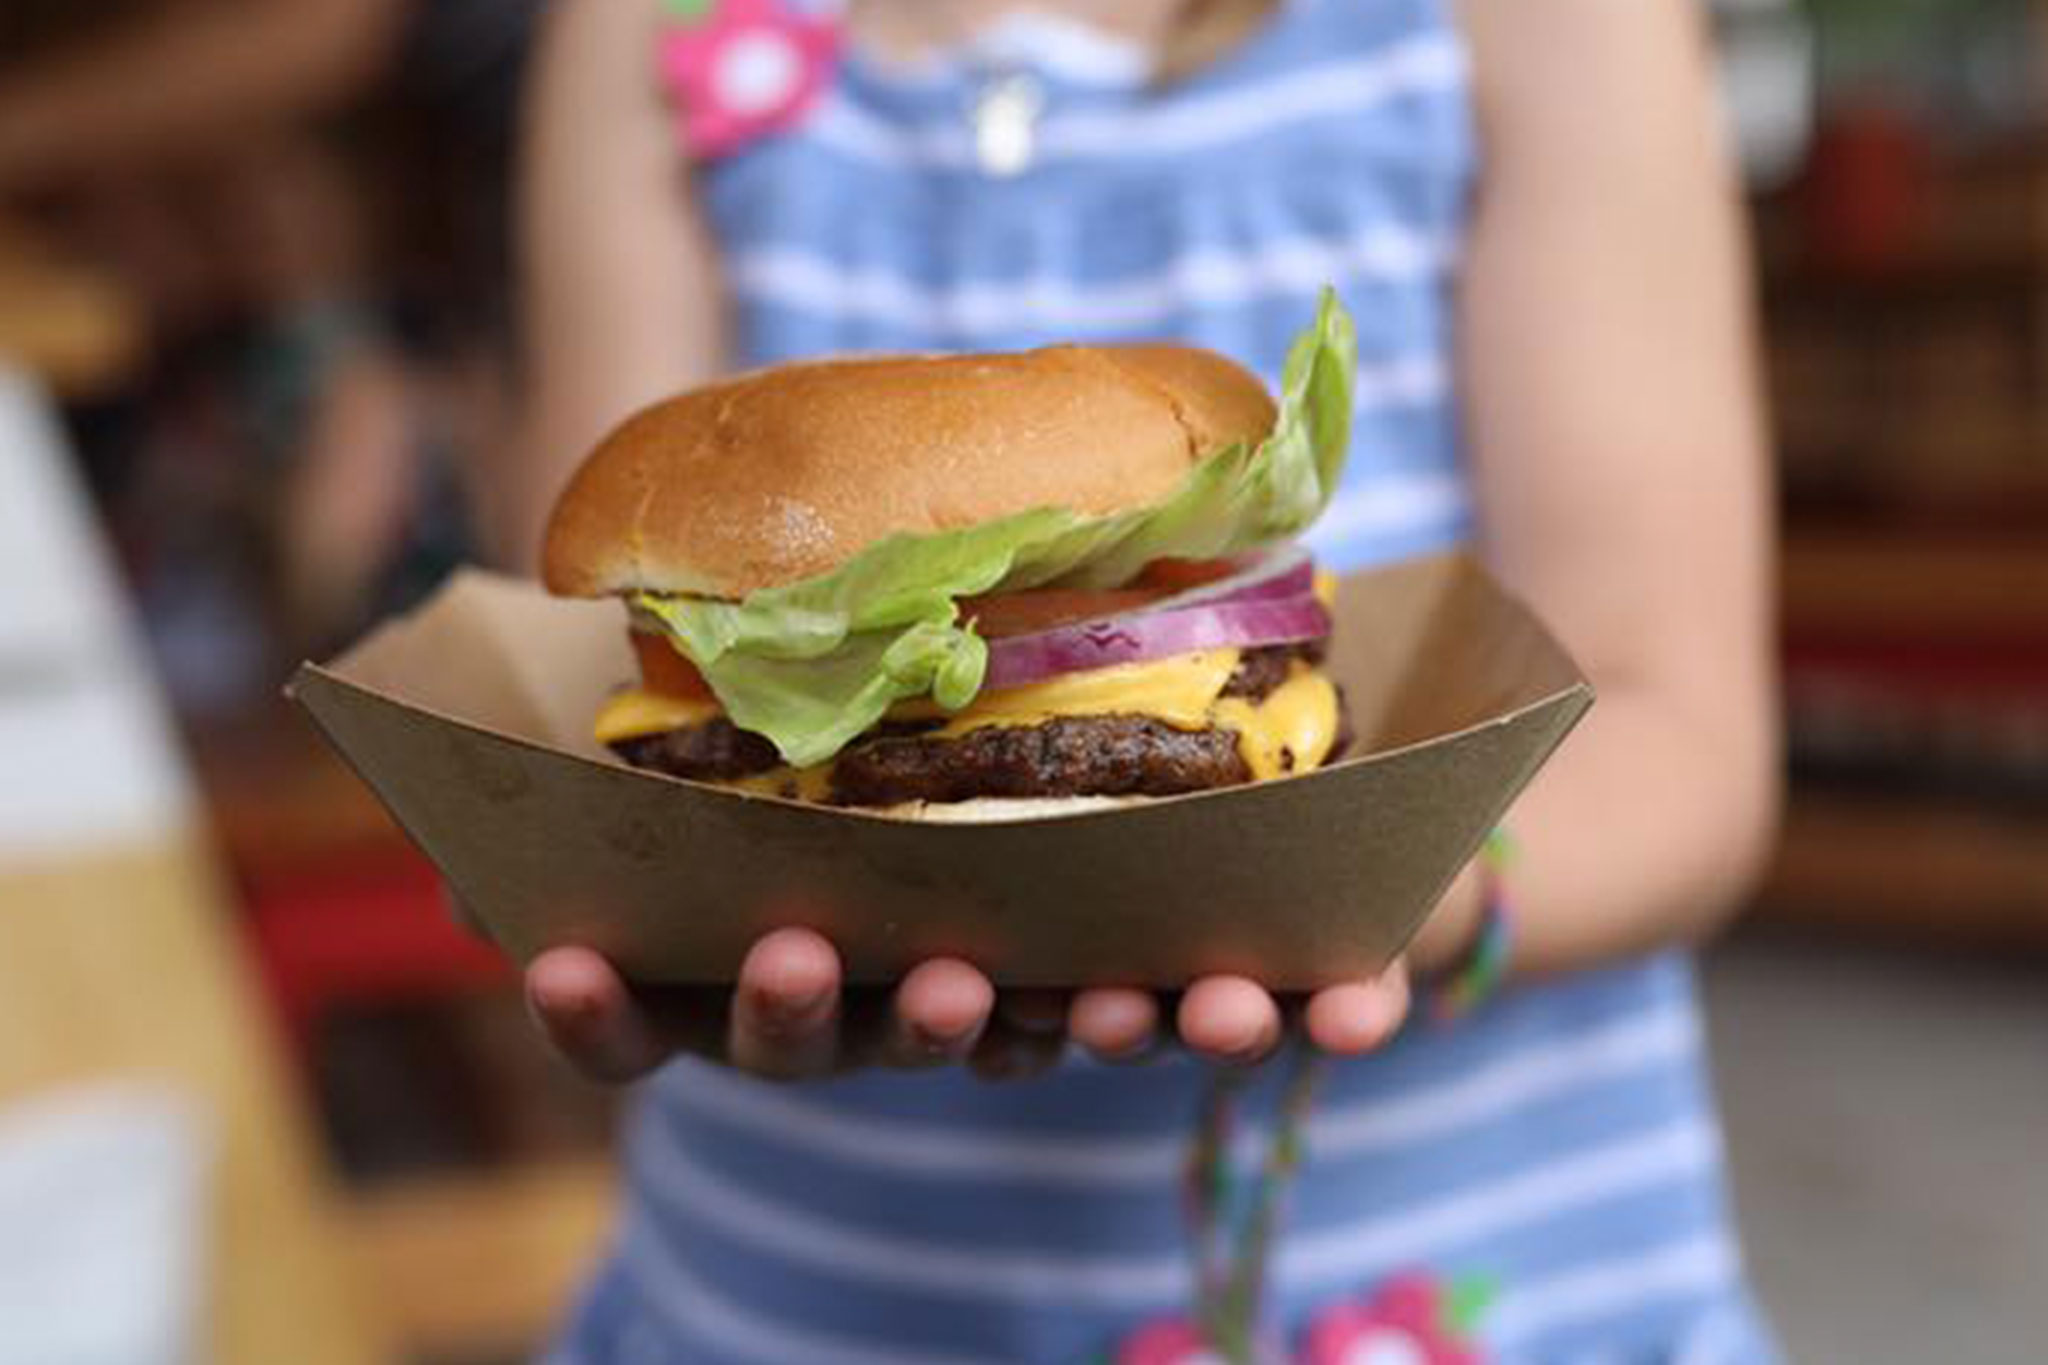 A child's hands hold a Hat Creek Burger in a takeout container